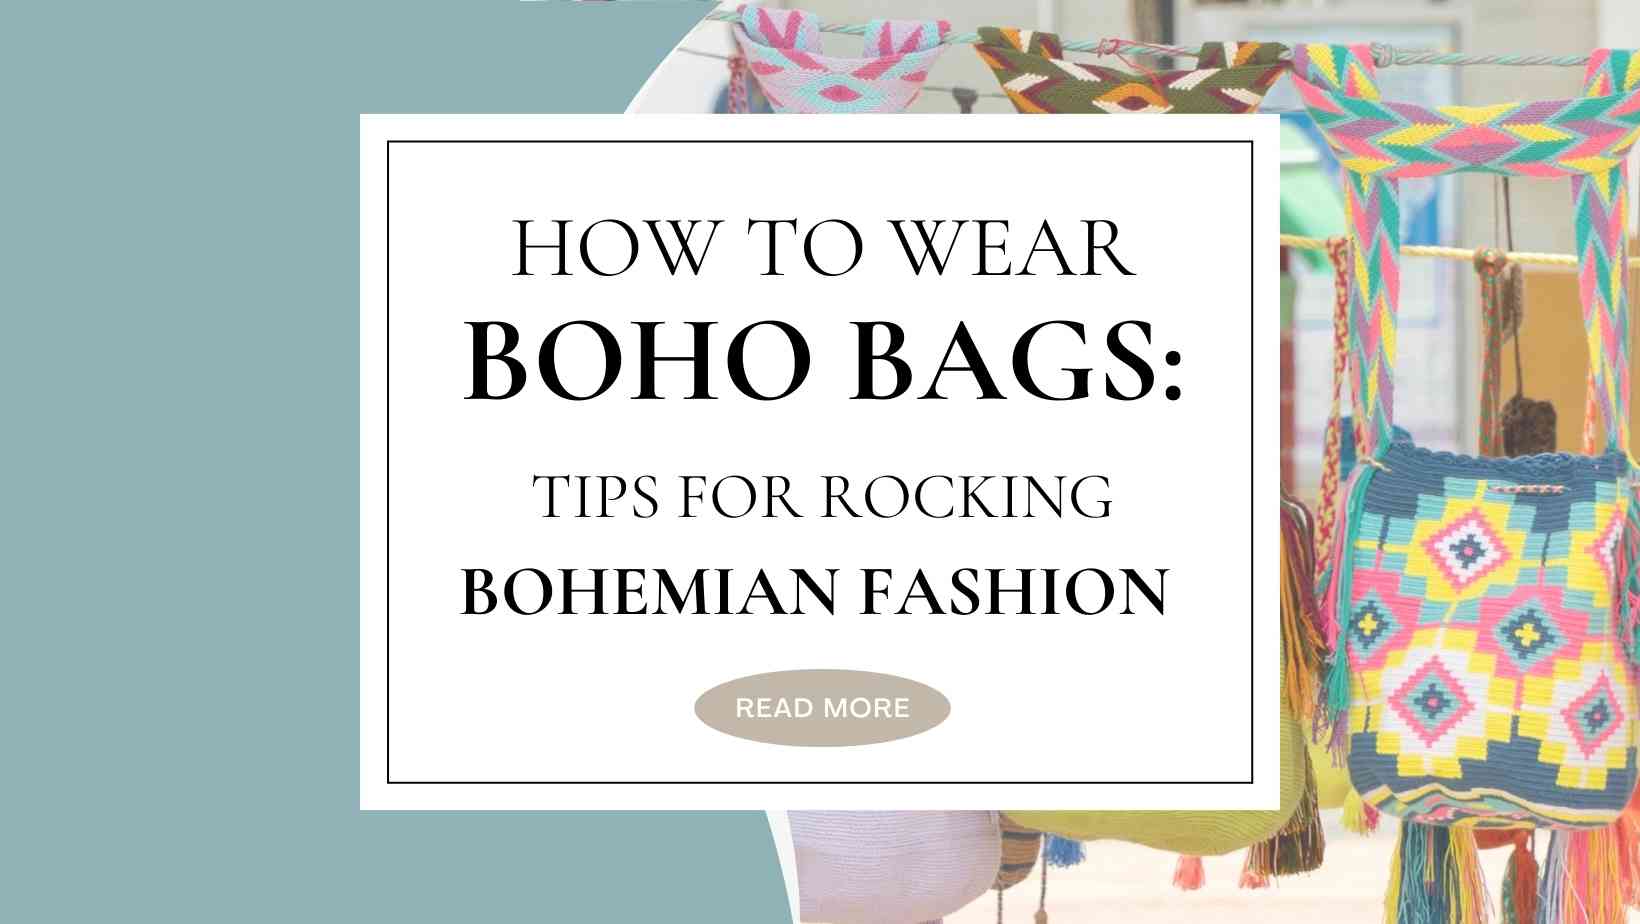 Hobo Bags Are Back - Here's How To Style The Slouchy, Retro Vibe